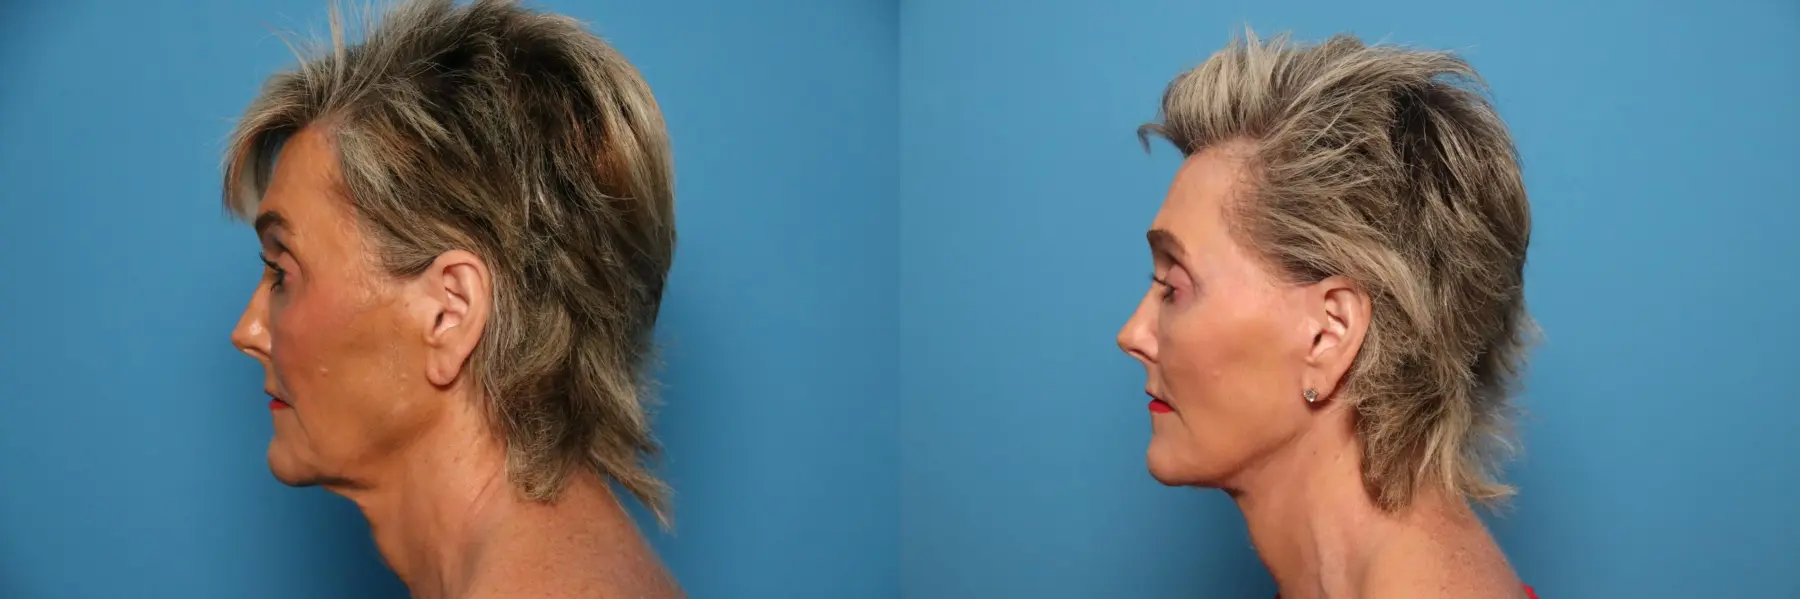 Mini Facelift: Patient 6 - Before and After 3